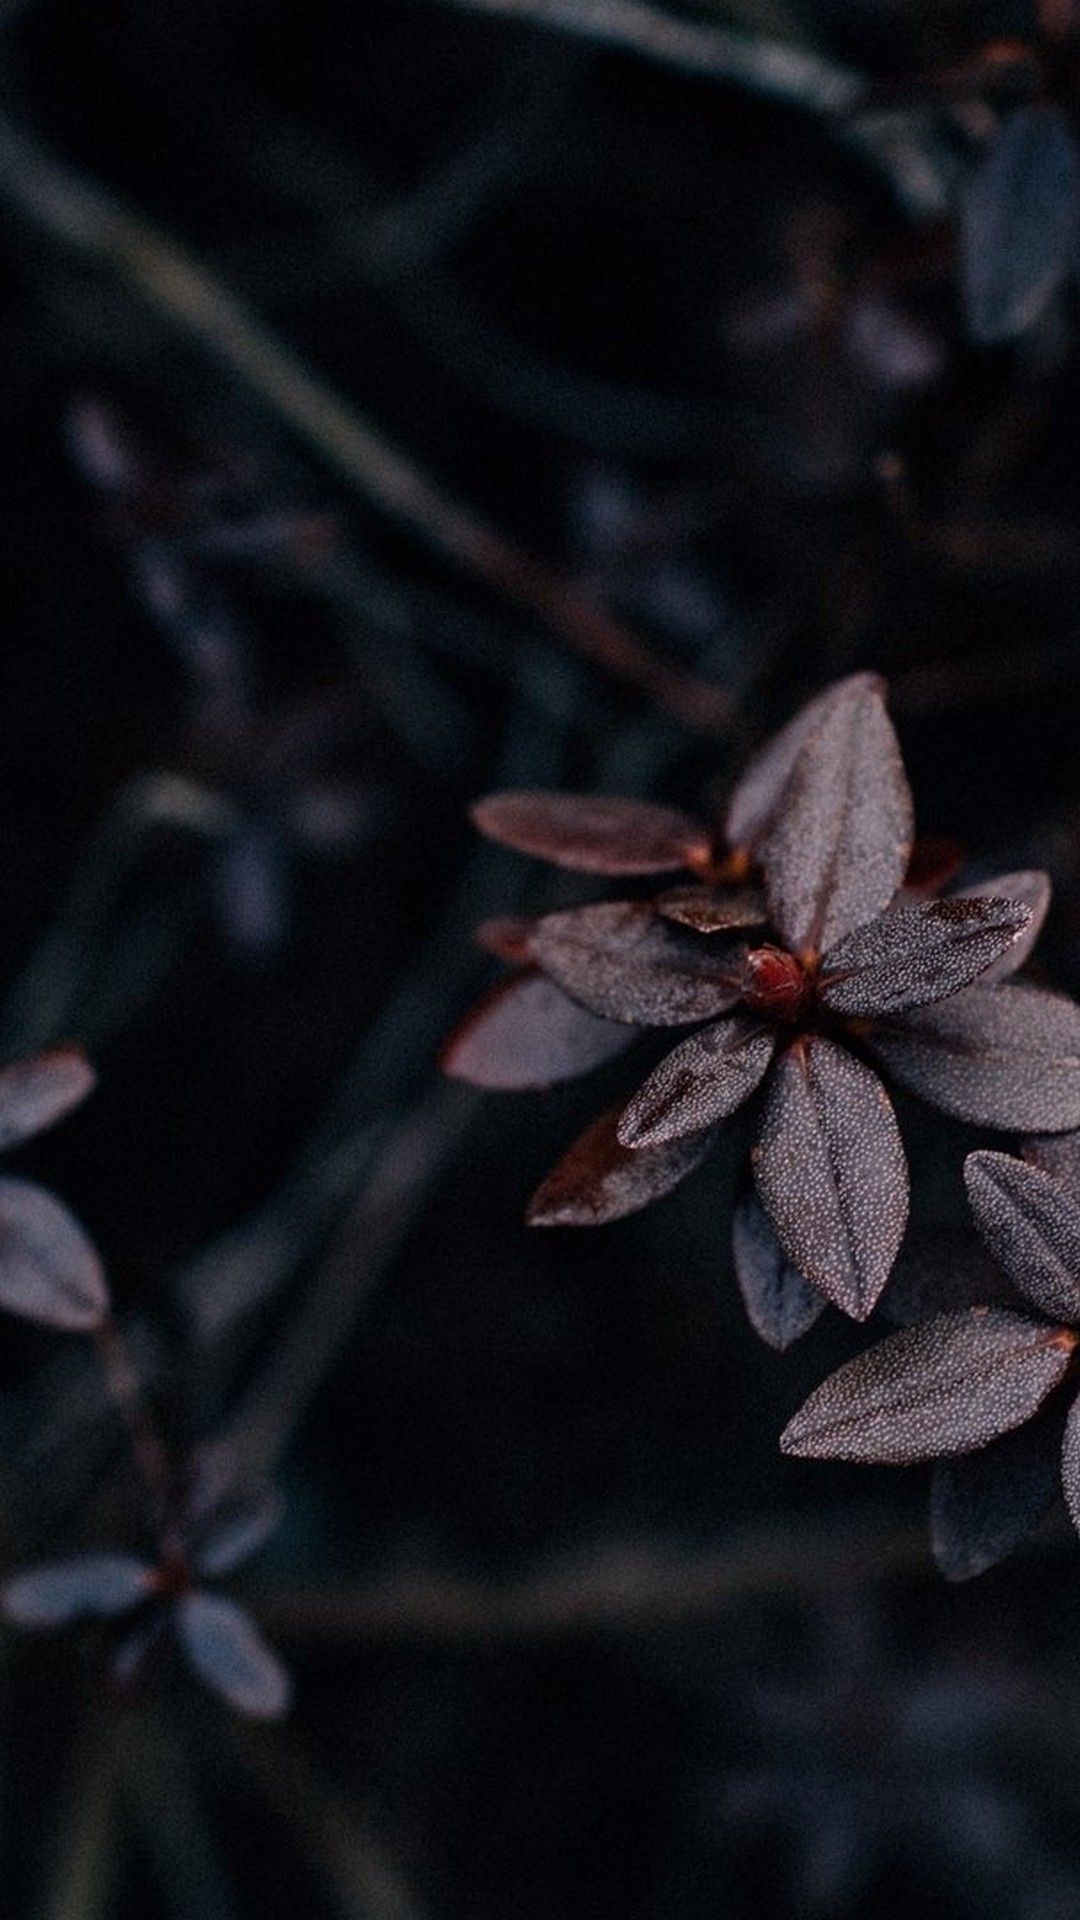 Aesthetic Dark Plant iPhone Wallpaper with high-resolution 1080x1920 pixel. You can use this wallpaper for your iPhone 5, 6, 7, 8, X, XS, XR backgrounds, Mobile Screensaver, or iPad Lock Screen - Dark, plants